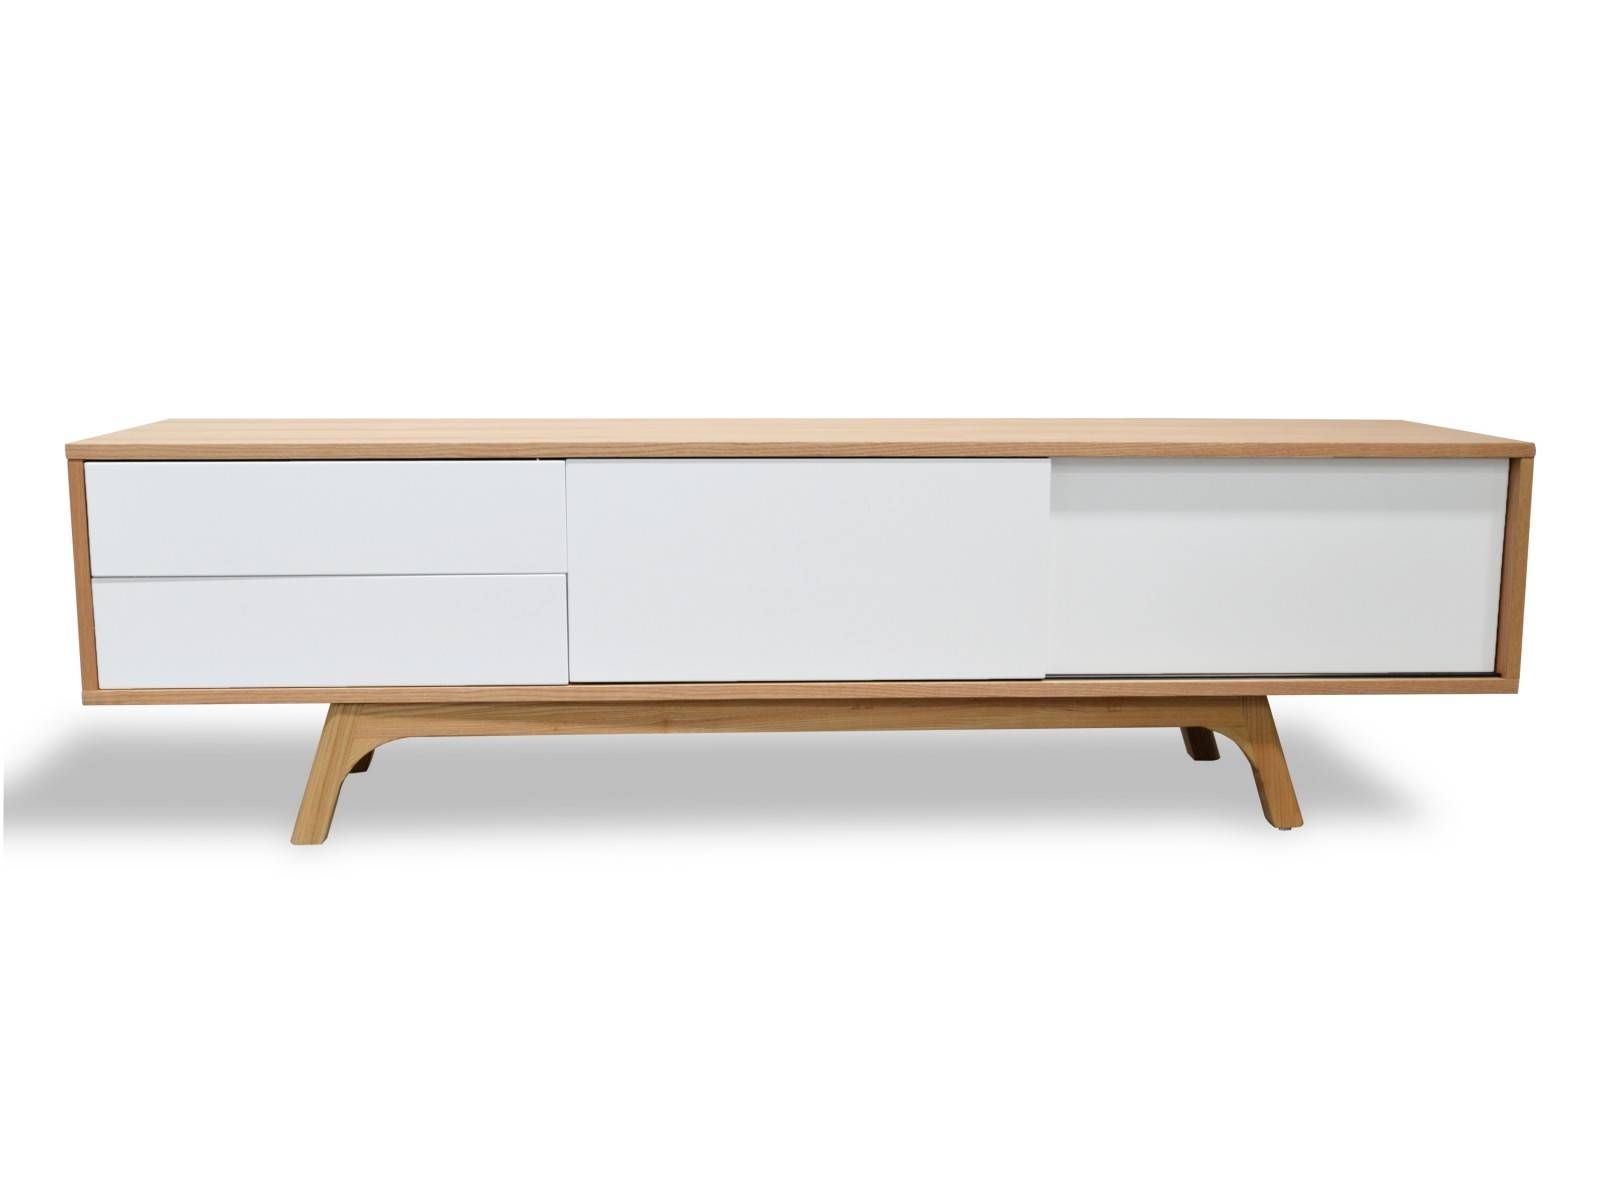 Entertainment Units – Stylish Tv Units For An Elegant Look | The Regarding Scandinavian Tv Stands (View 8 of 15)